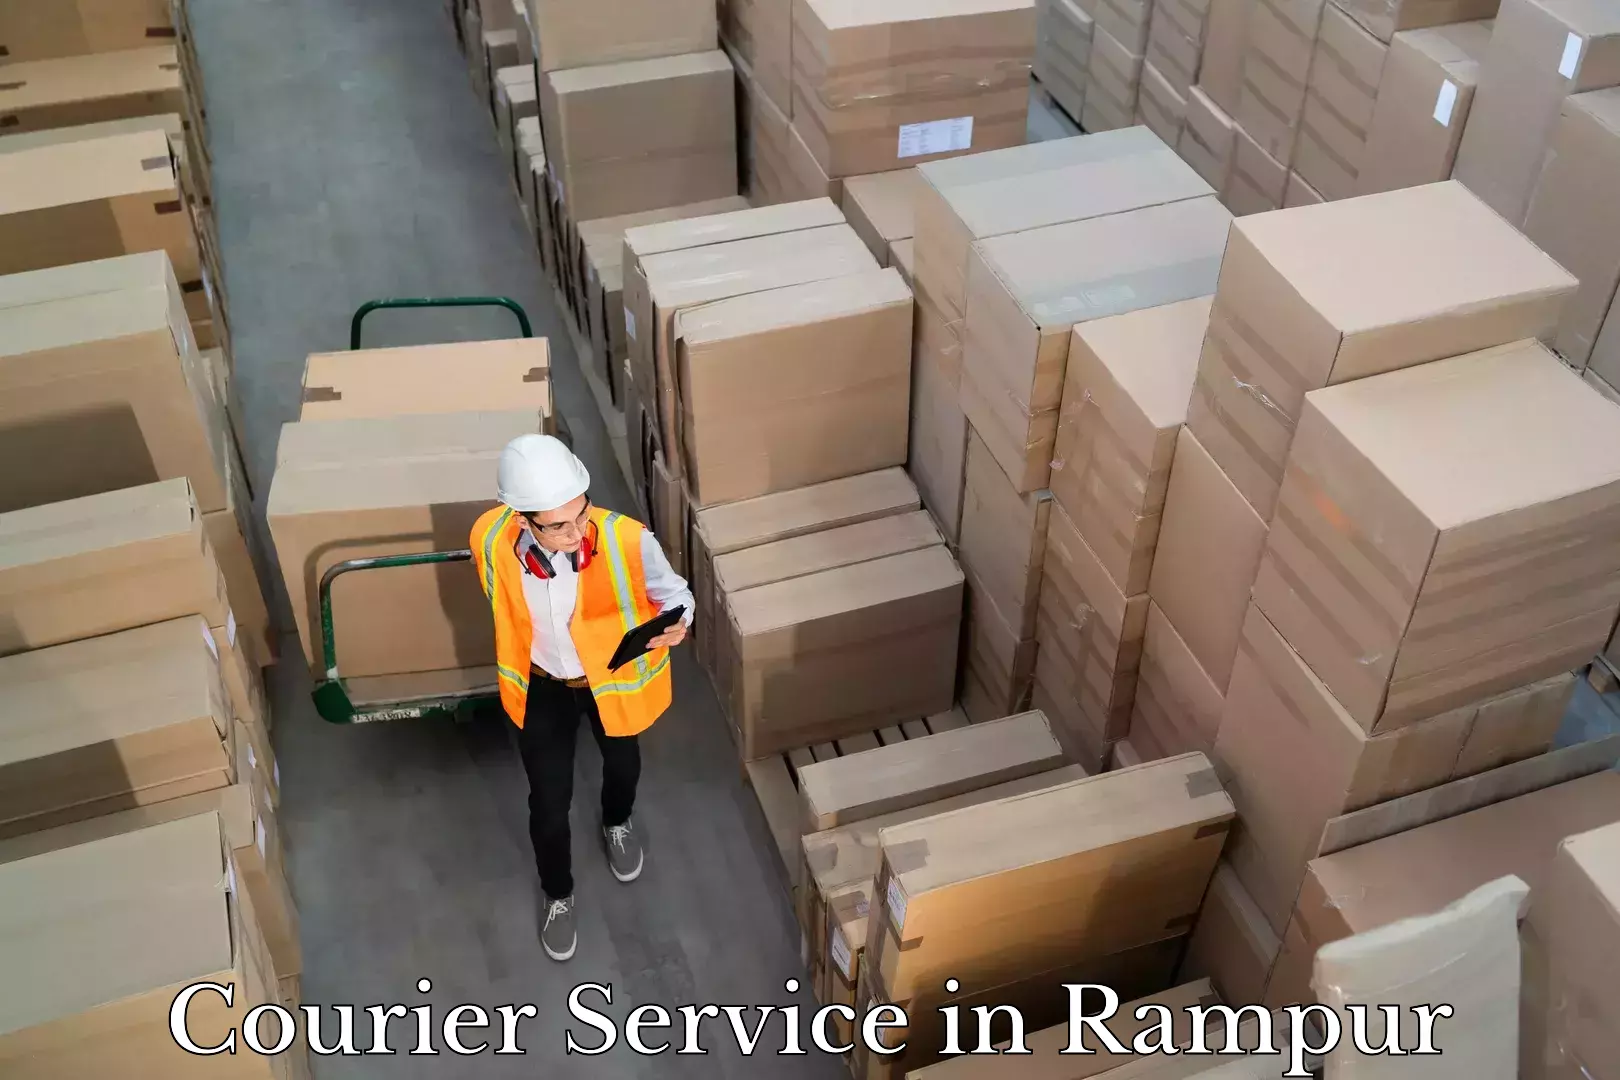 Multi-carrier shipping in Rampur